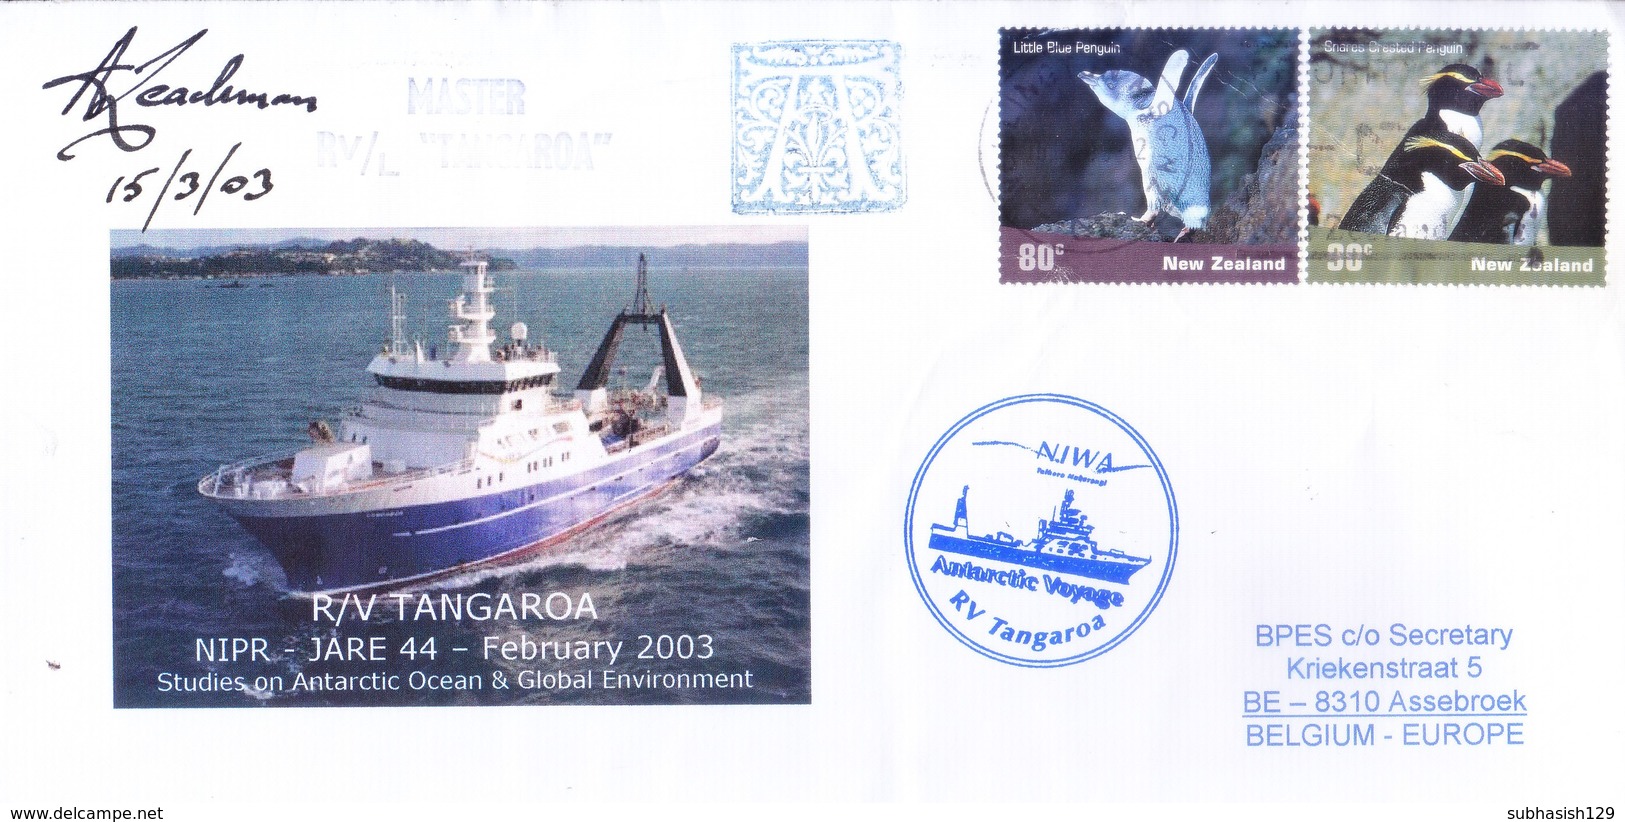 NEW ZEALAND ANTARCTIC EXPEDITION CACHET COVER, 2003 - NEW ZEALAND - JAPAN JOINT ANTARCTIC EXPEDITION, OFFICIAL SIGNATURE - Lettres & Documents